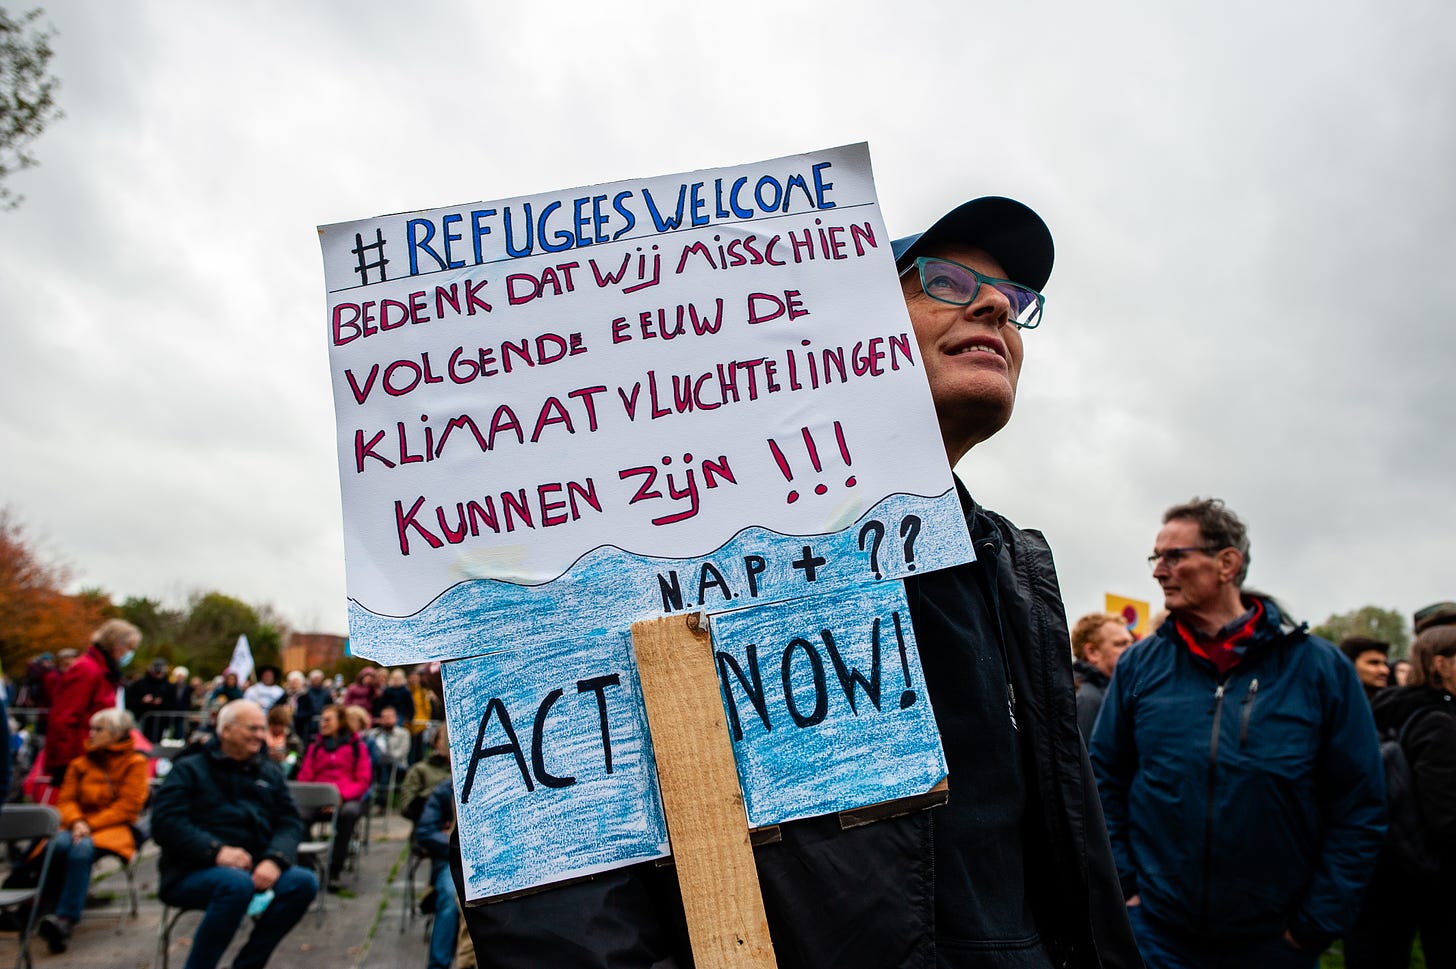 A pro-refugee protester during a demonstration organized by the Dutch Climate Crisis Coalition in 2021. (Photo by Ana Fernandez/SOPA Images/LightRocket via Getty Images.)